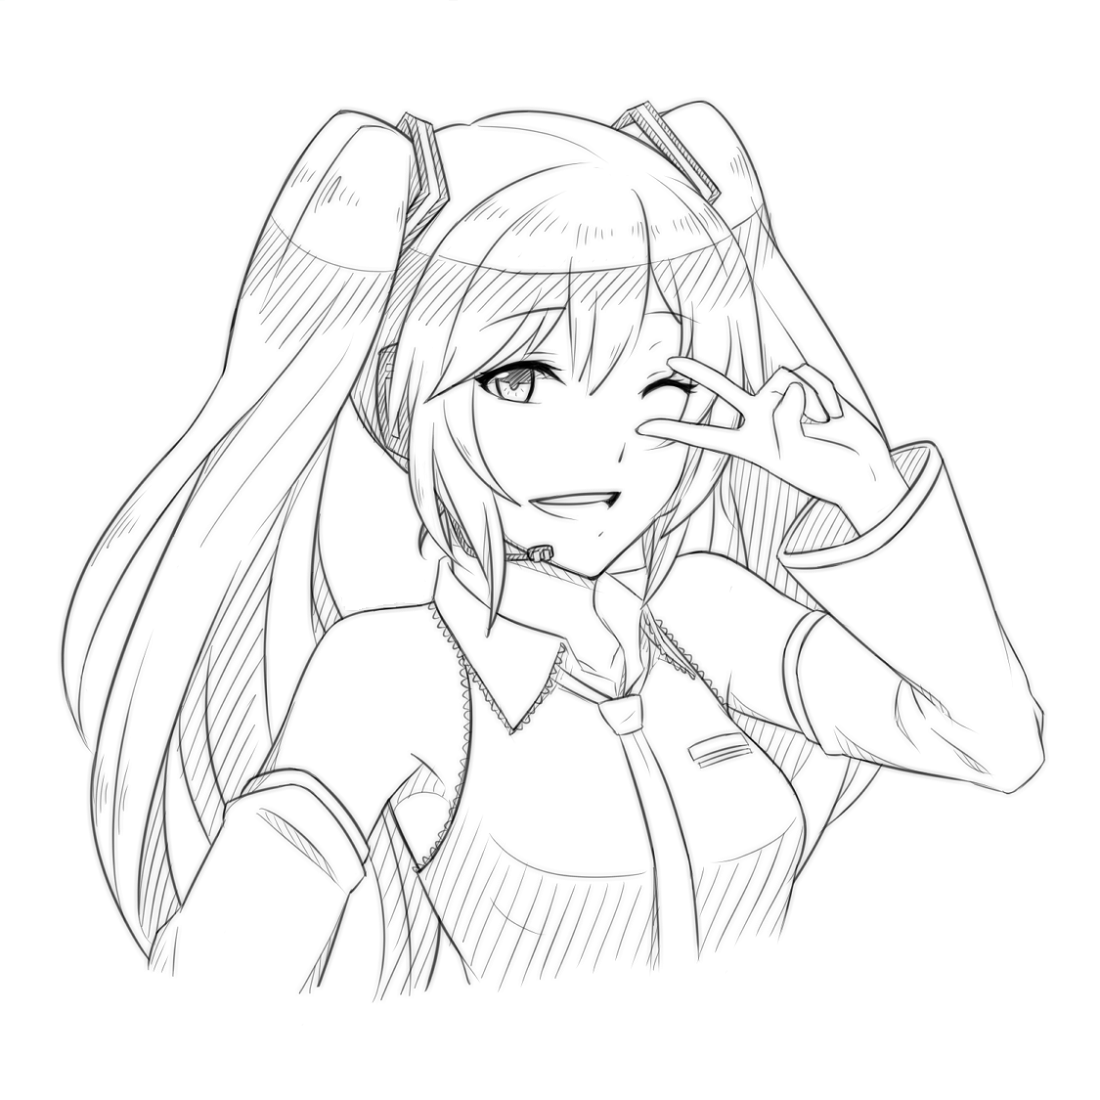 Hatsune Miku Coloring Pages   Coloring Home